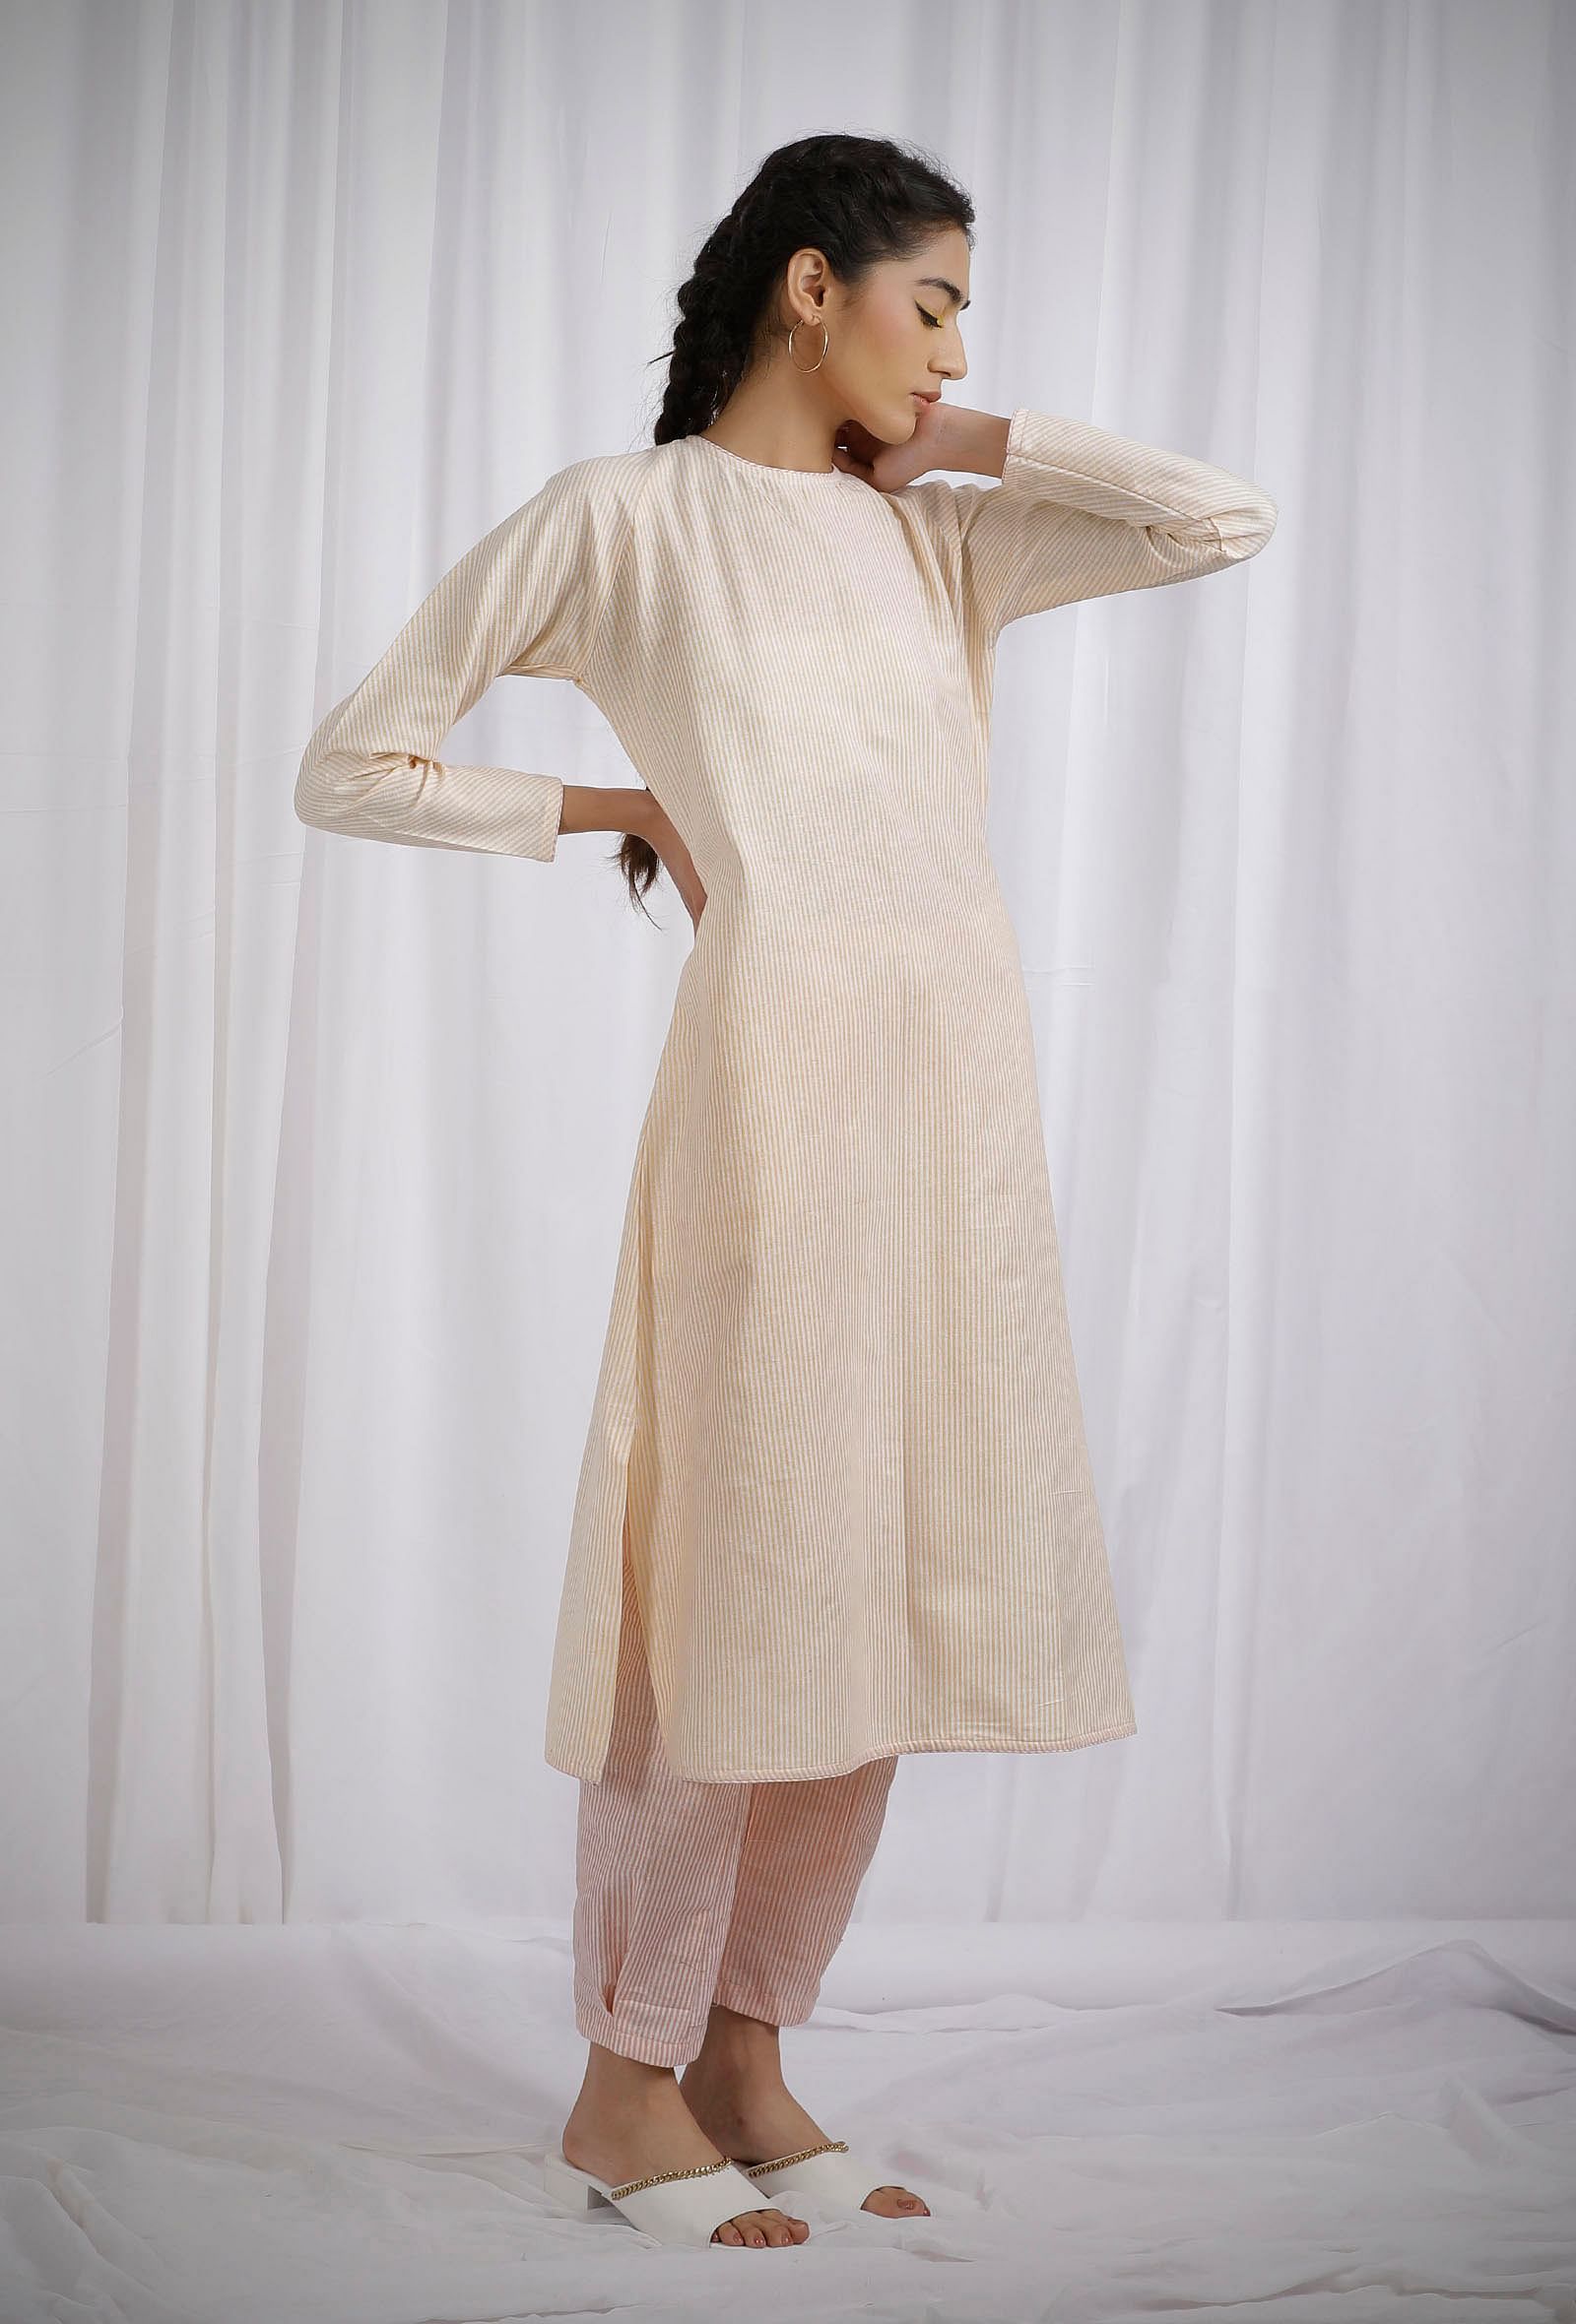 Buy Off White Embroidered Chanderi Kurta with Cotton Pants and Brocade  Dupatta  Set of 3  161KARJ3  The loom